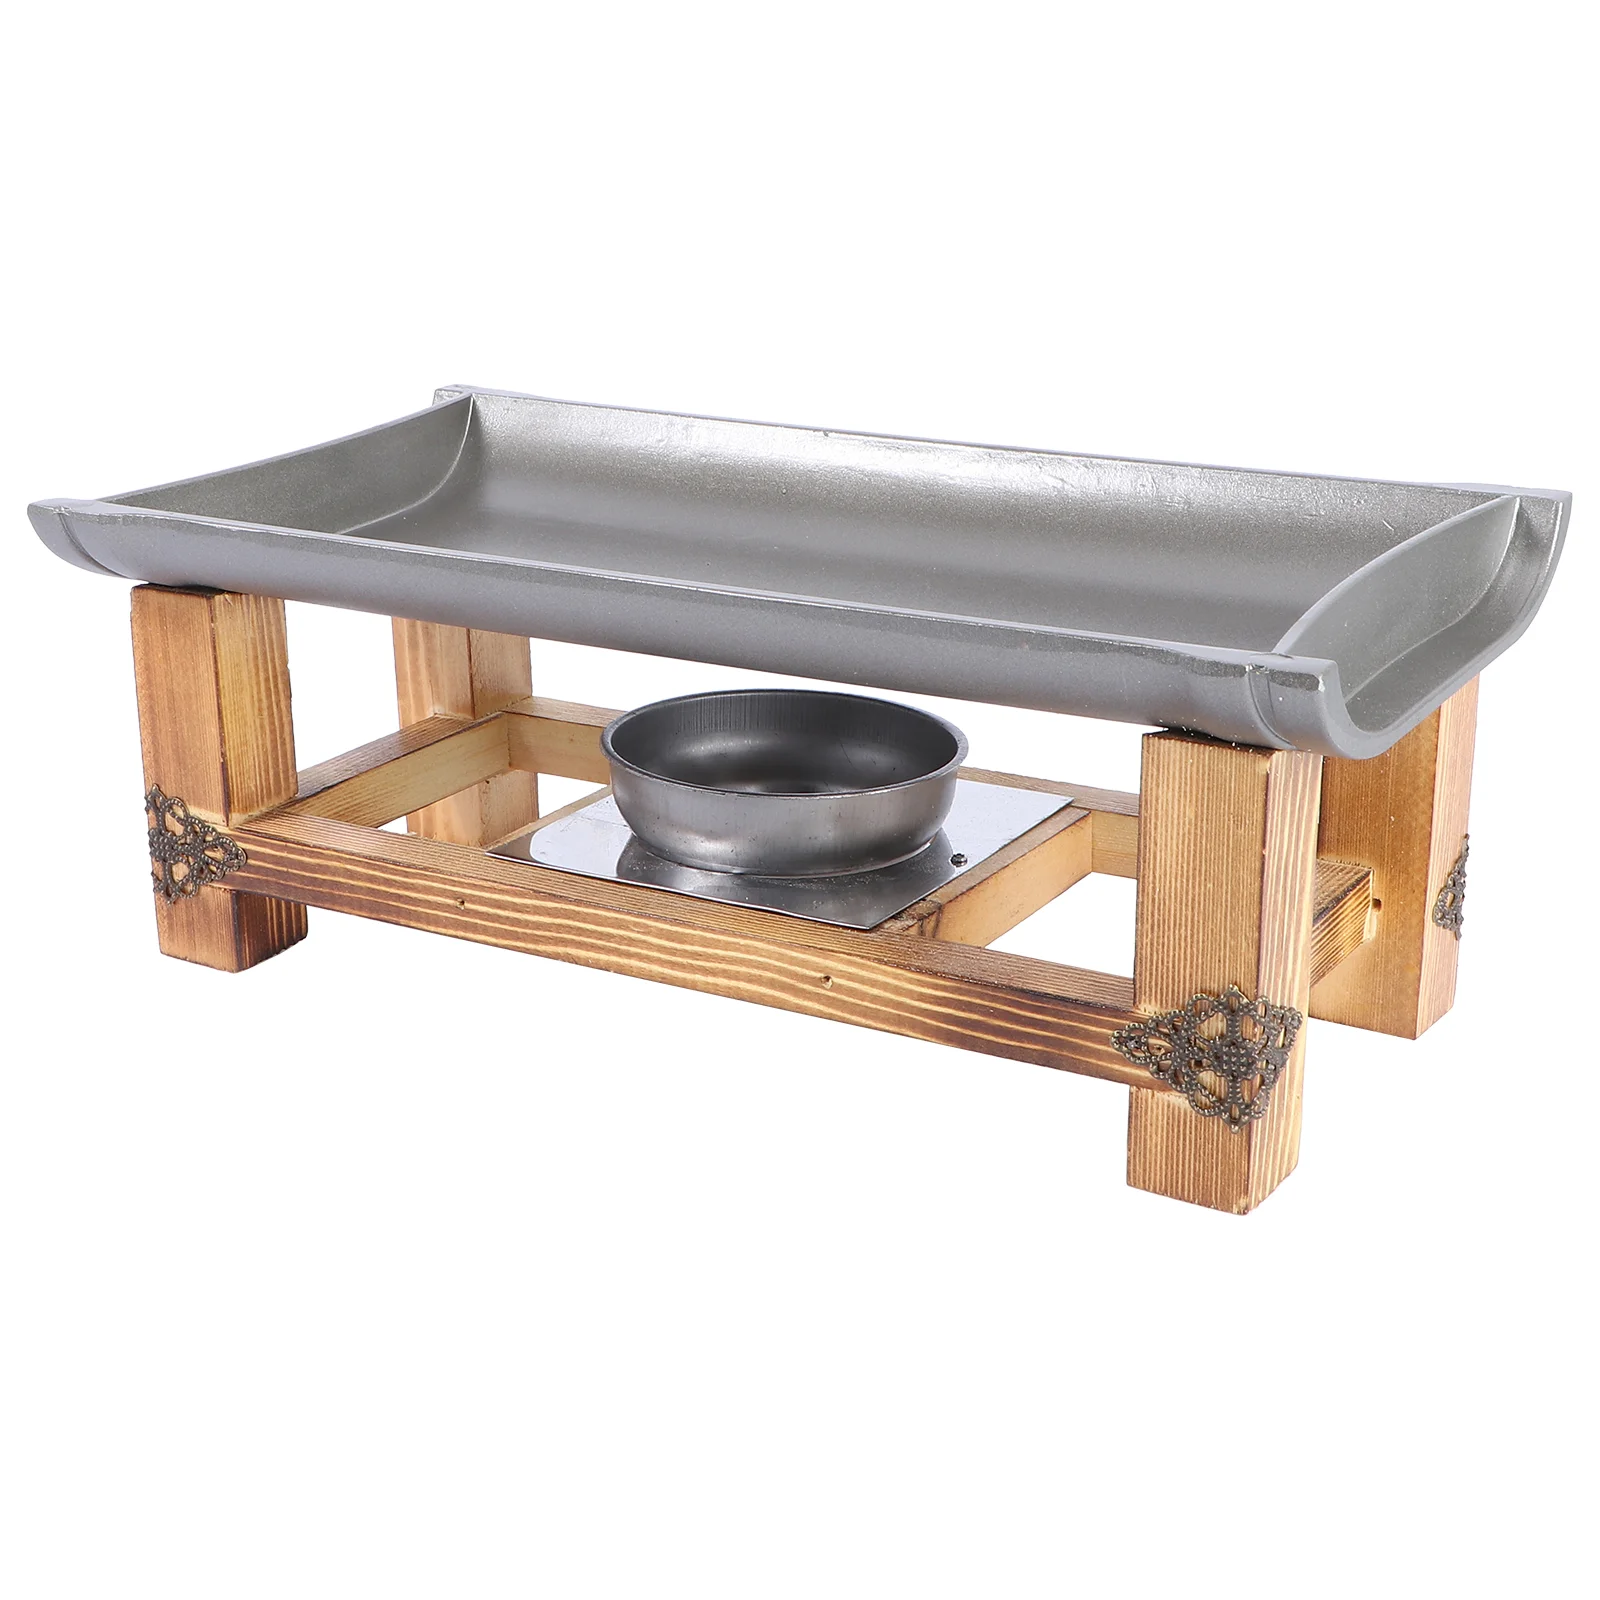 

Square Grilled Fish Stove Nonstick Bakeware Fish Pan Wooden Base Charcoal Grill Serve Plate Cast Iron Fish Pan Nonstick Cookware